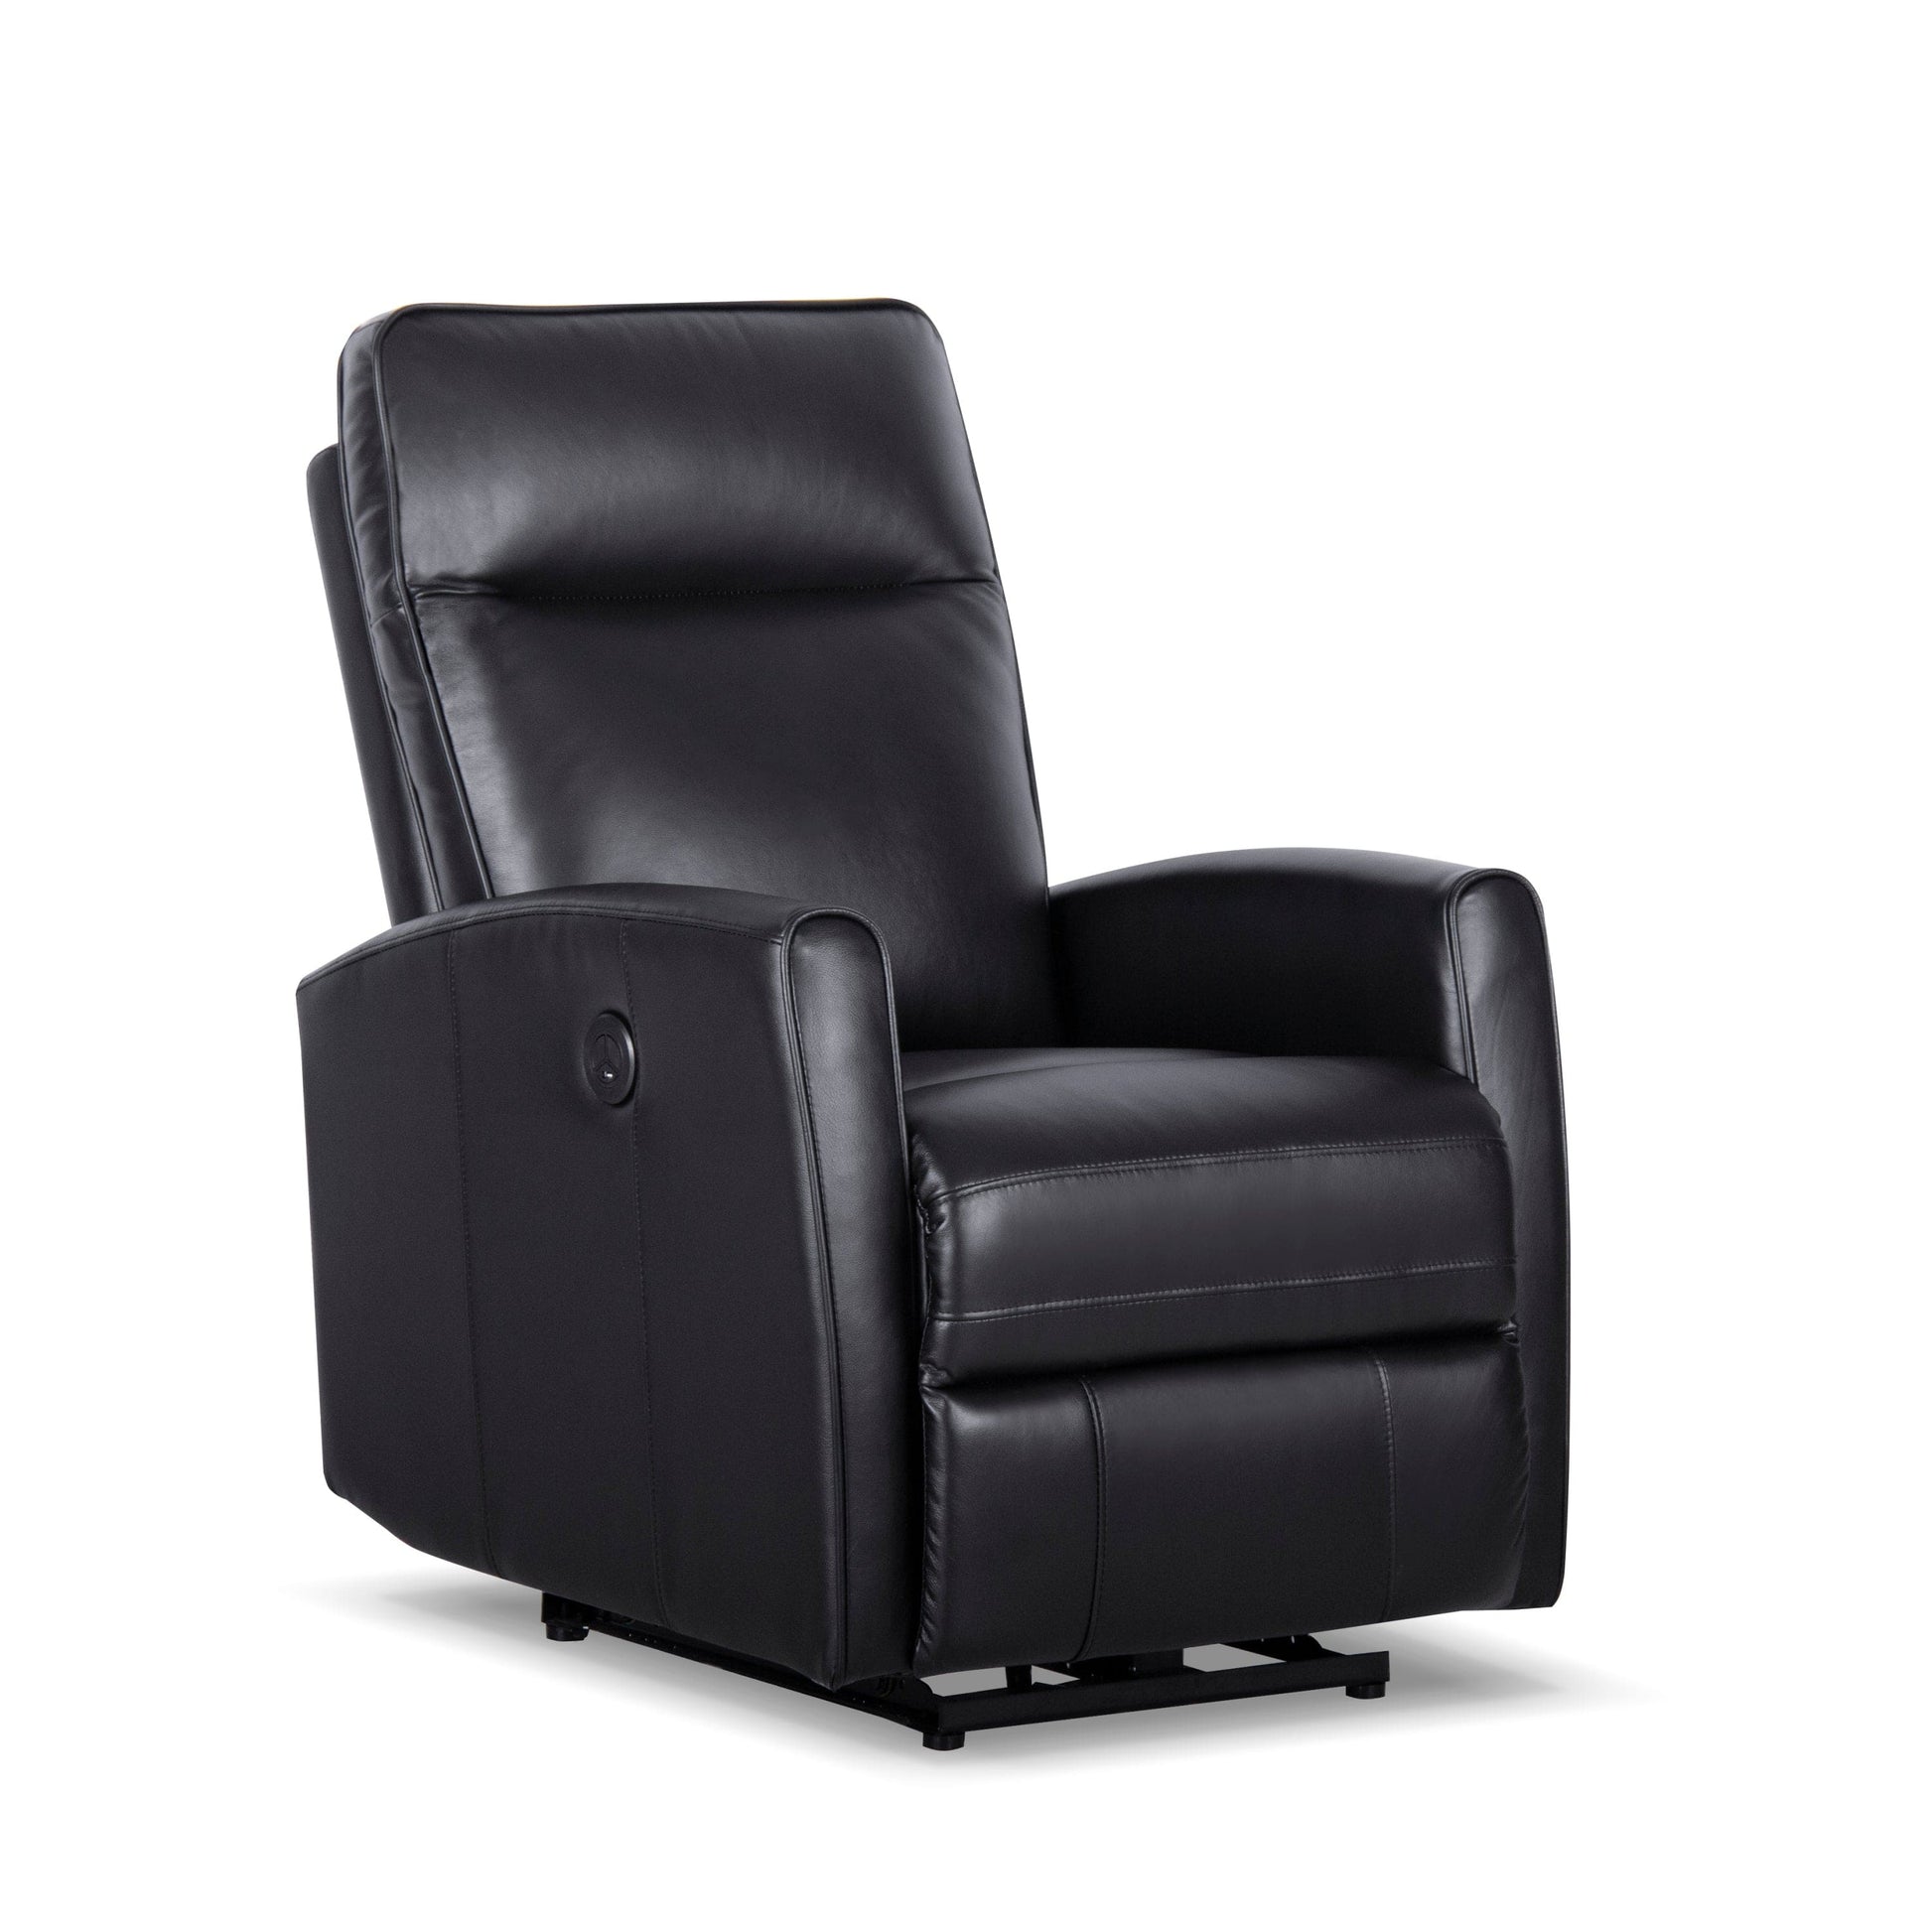 1st Choice Furniture Direct Power Motion Recliner 1st Choice High-quality Power Recliner with USB Charger in Black Finish